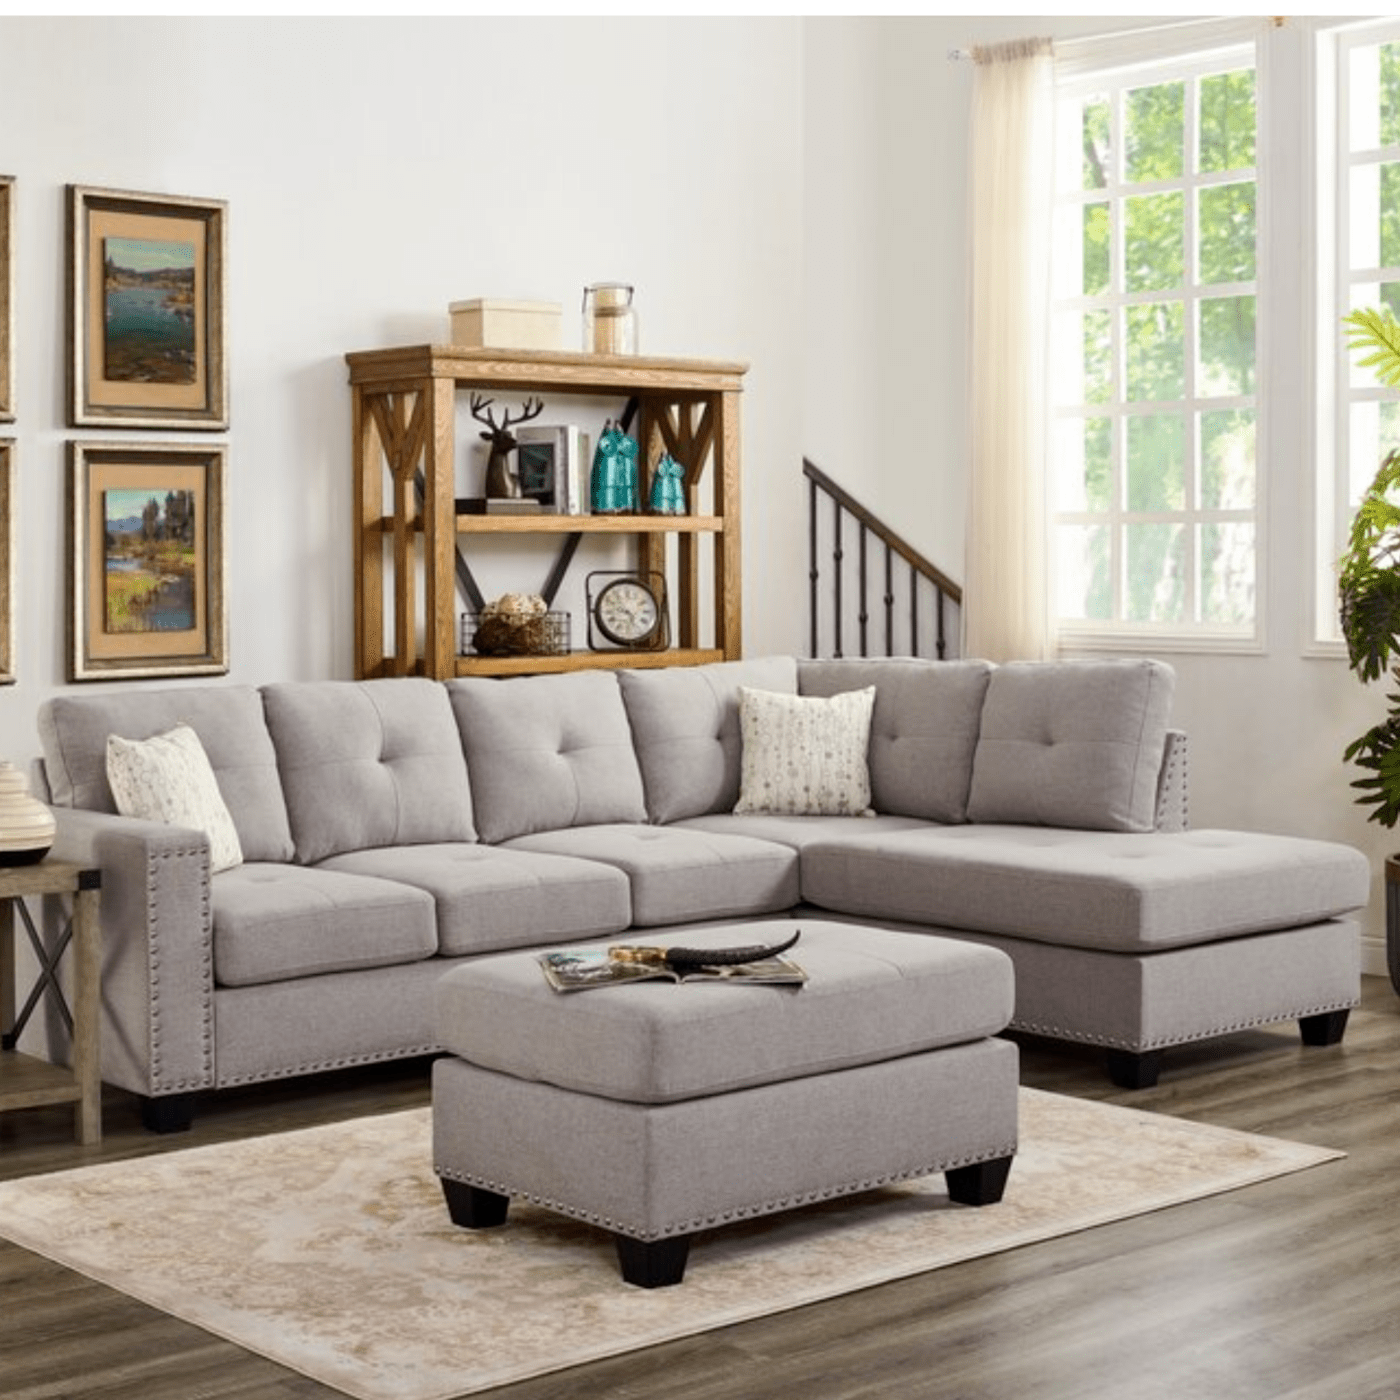 Woodenlia Reversible Sectional Sofa with Ottoman